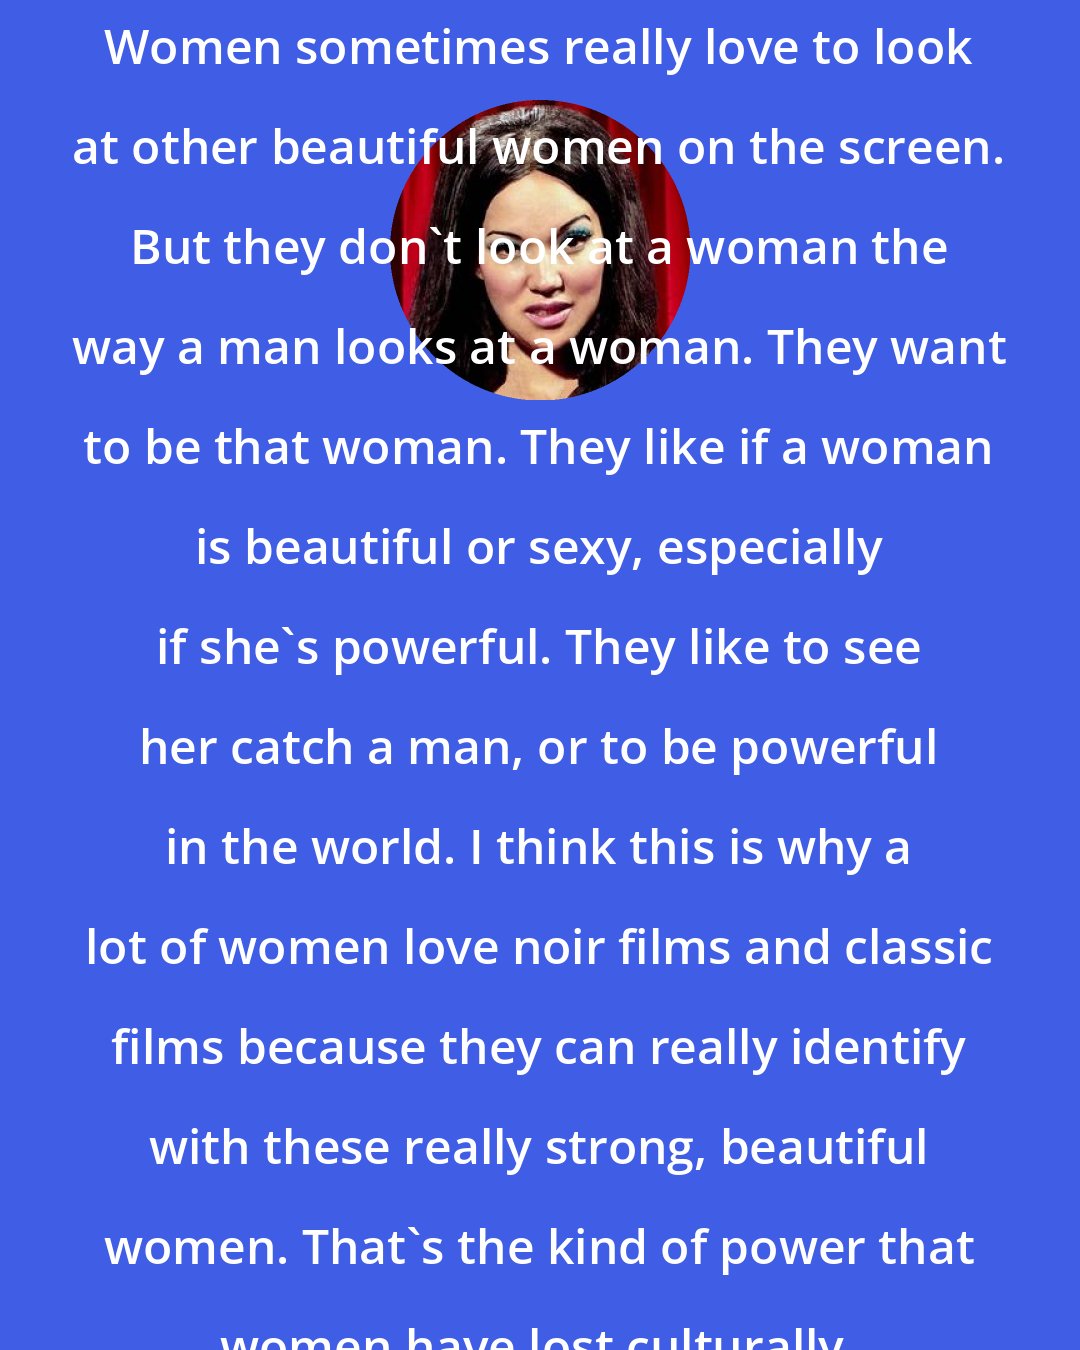 Anna Biller: Women sometimes really love to look at other beautiful women on the screen. But they don't look at a woman the way a man looks at a woman. They want to be that woman. They like if a woman is beautiful or sexy, especially if she's powerful. They like to see her catch a man, or to be powerful in the world. I think this is why a lot of women love noir films and classic films because they can really identify with these really strong, beautiful women. That's the kind of power that women have lost culturally.